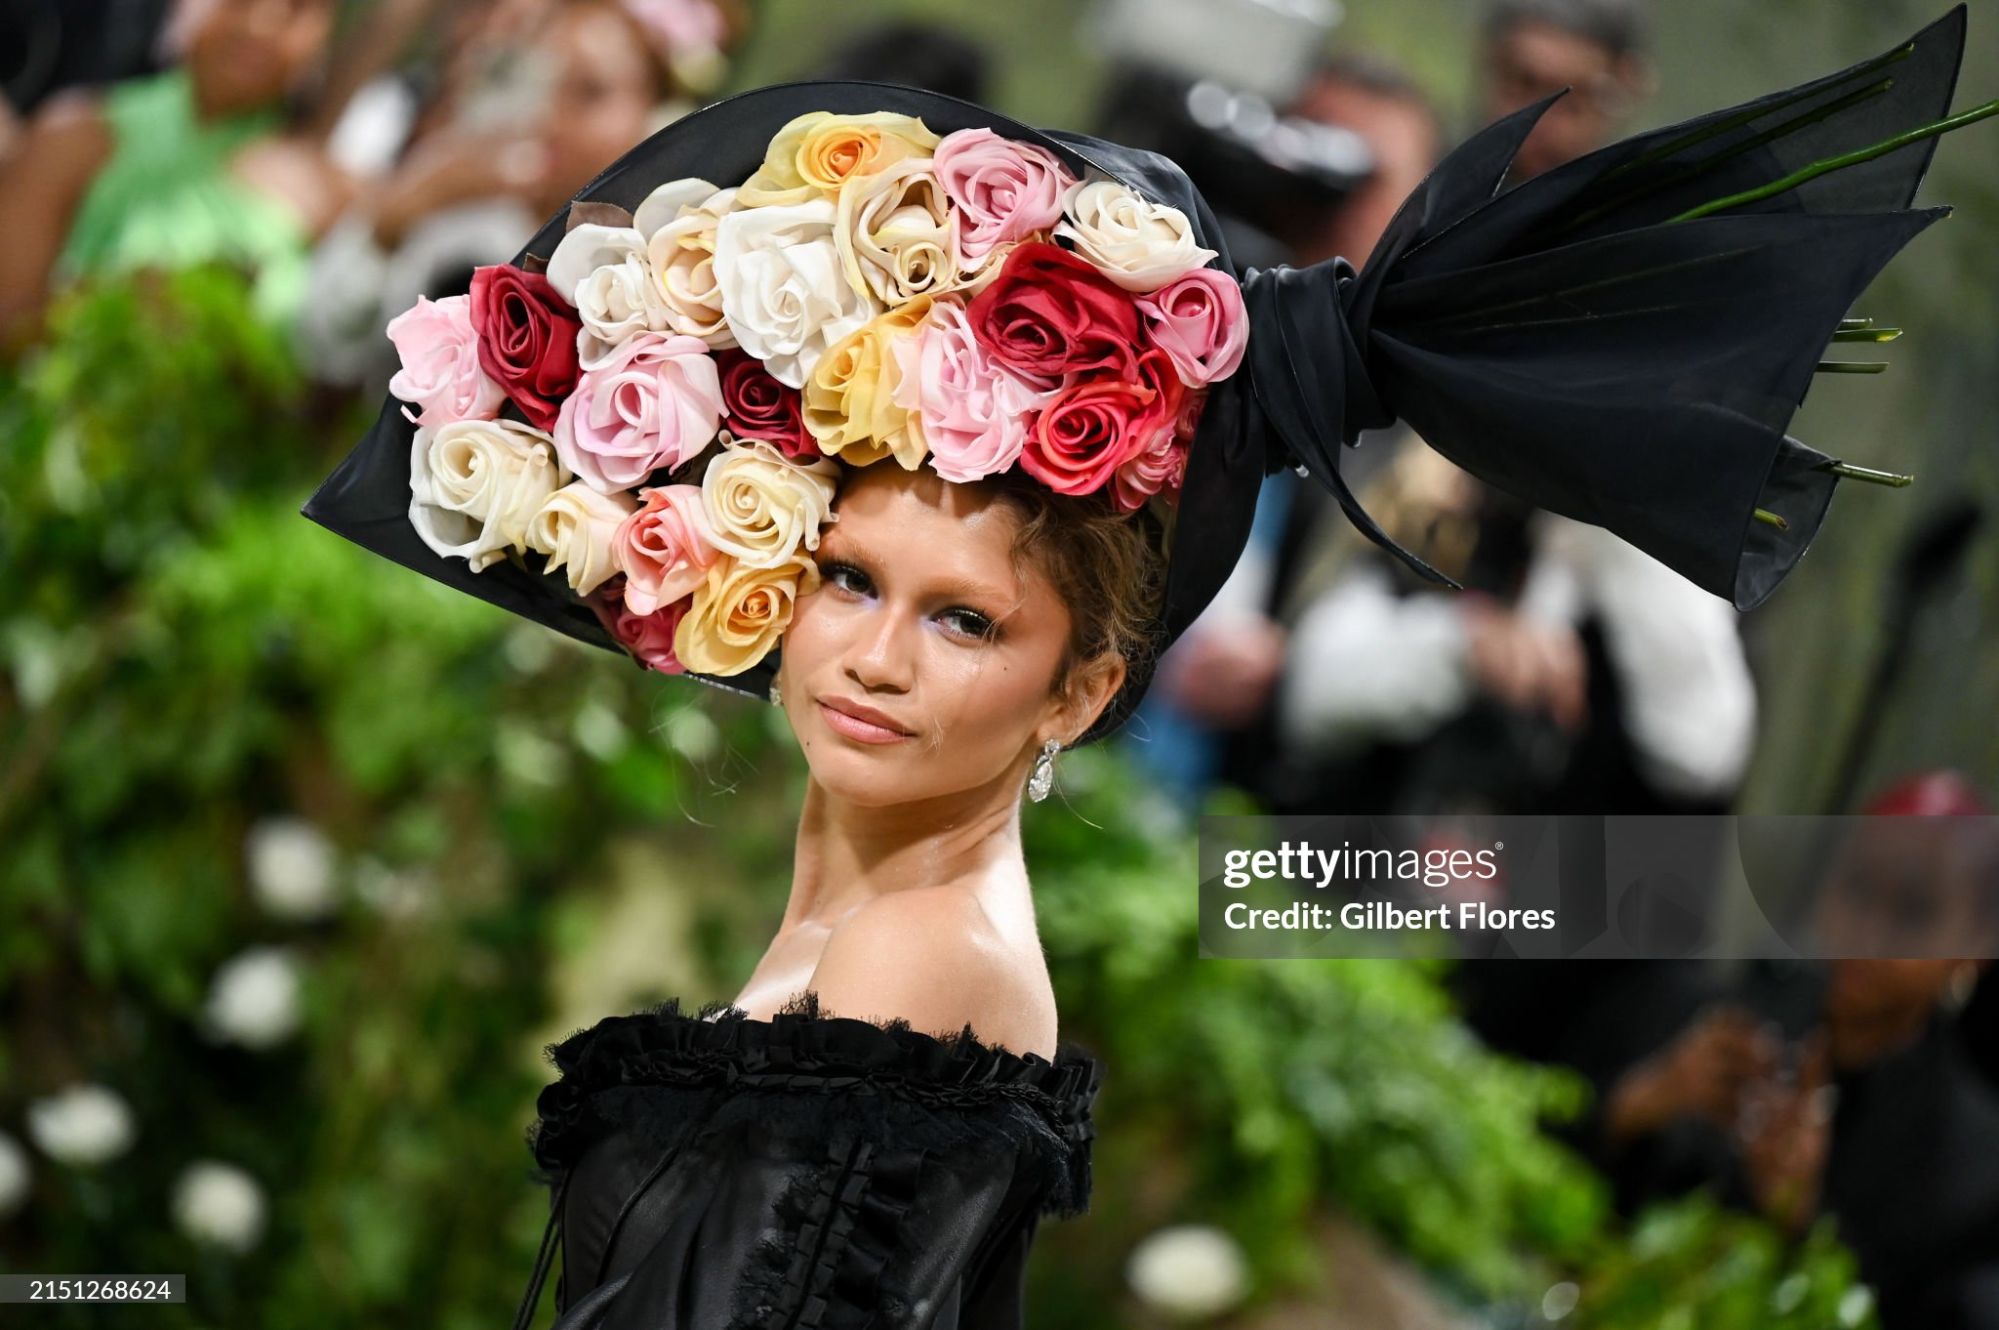 gettyimages-2151268624-2048x2048.jpg